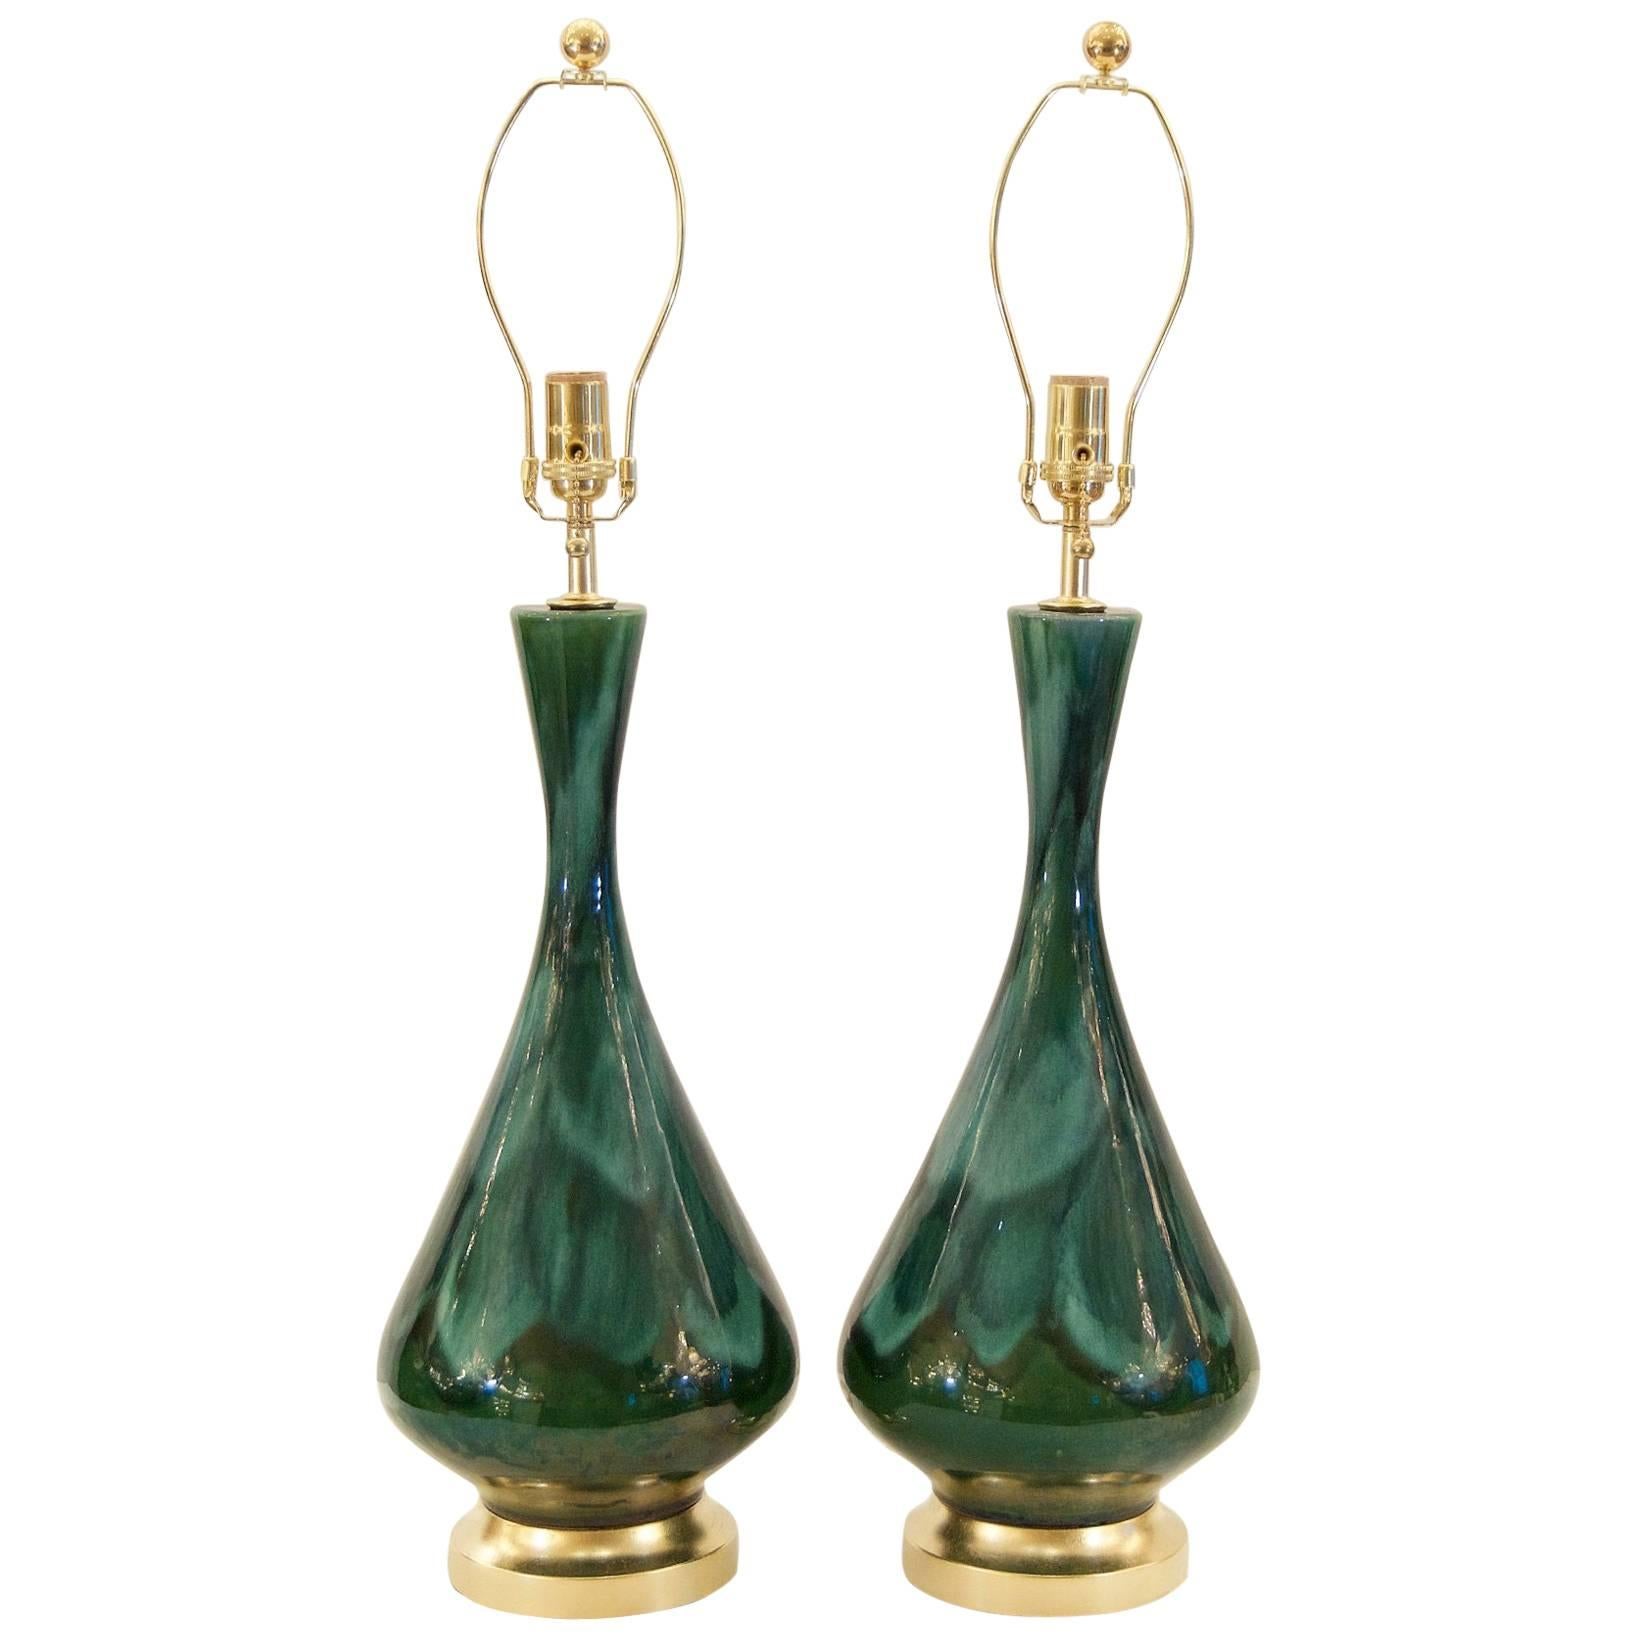 Royal Haeger Blue and Green Drip Glaze Lamps with Gilt Hardware